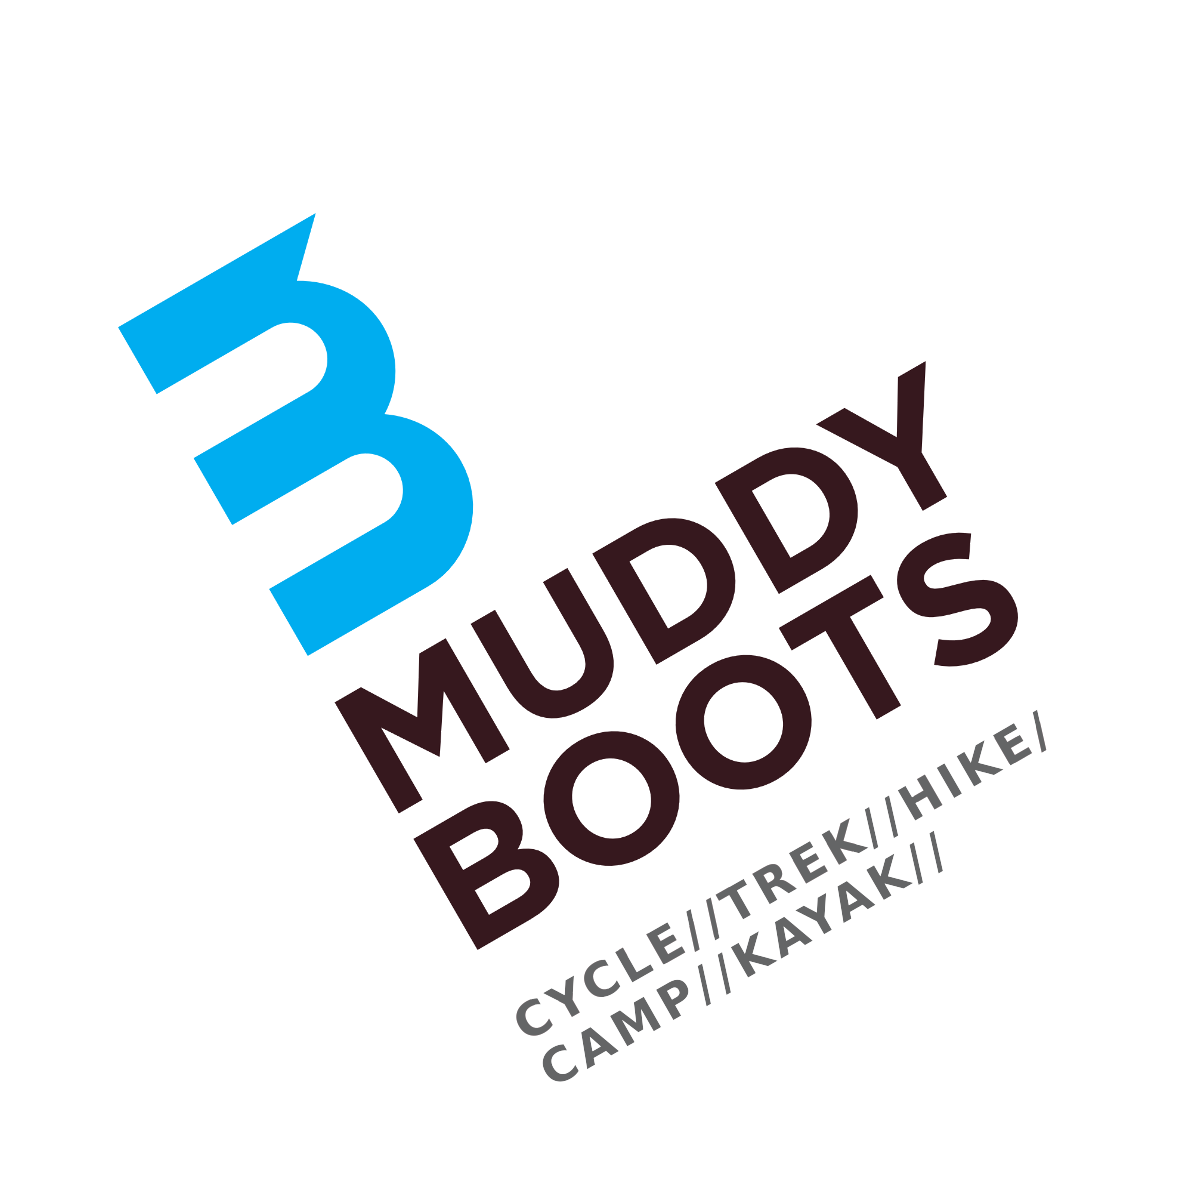 Welcome To Muddyboots - Camp Muddy Boots Greater Noida (1200x1200)